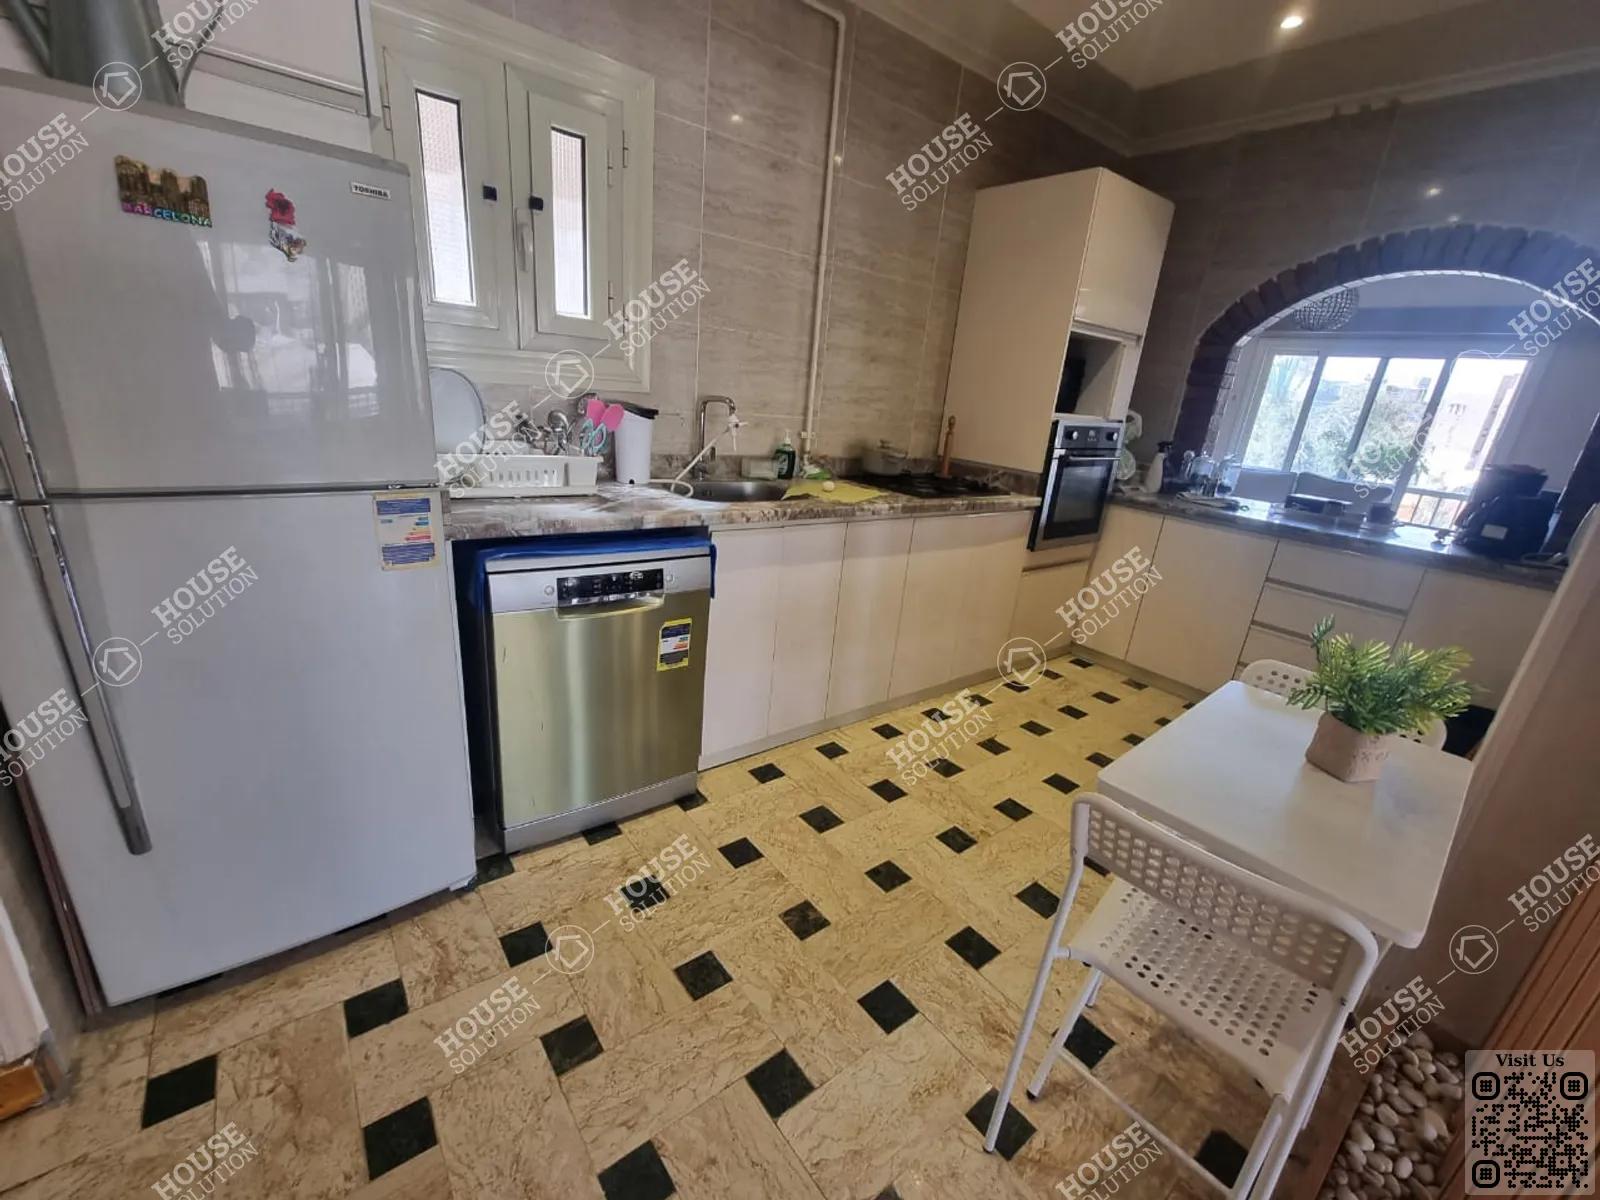 KITCHEN  @ Apartments For Rent In Maadi Maadi Degla Area: 140 m² consists of 2 Bedrooms 2 Bathrooms Furnished 5 stars #5657-2